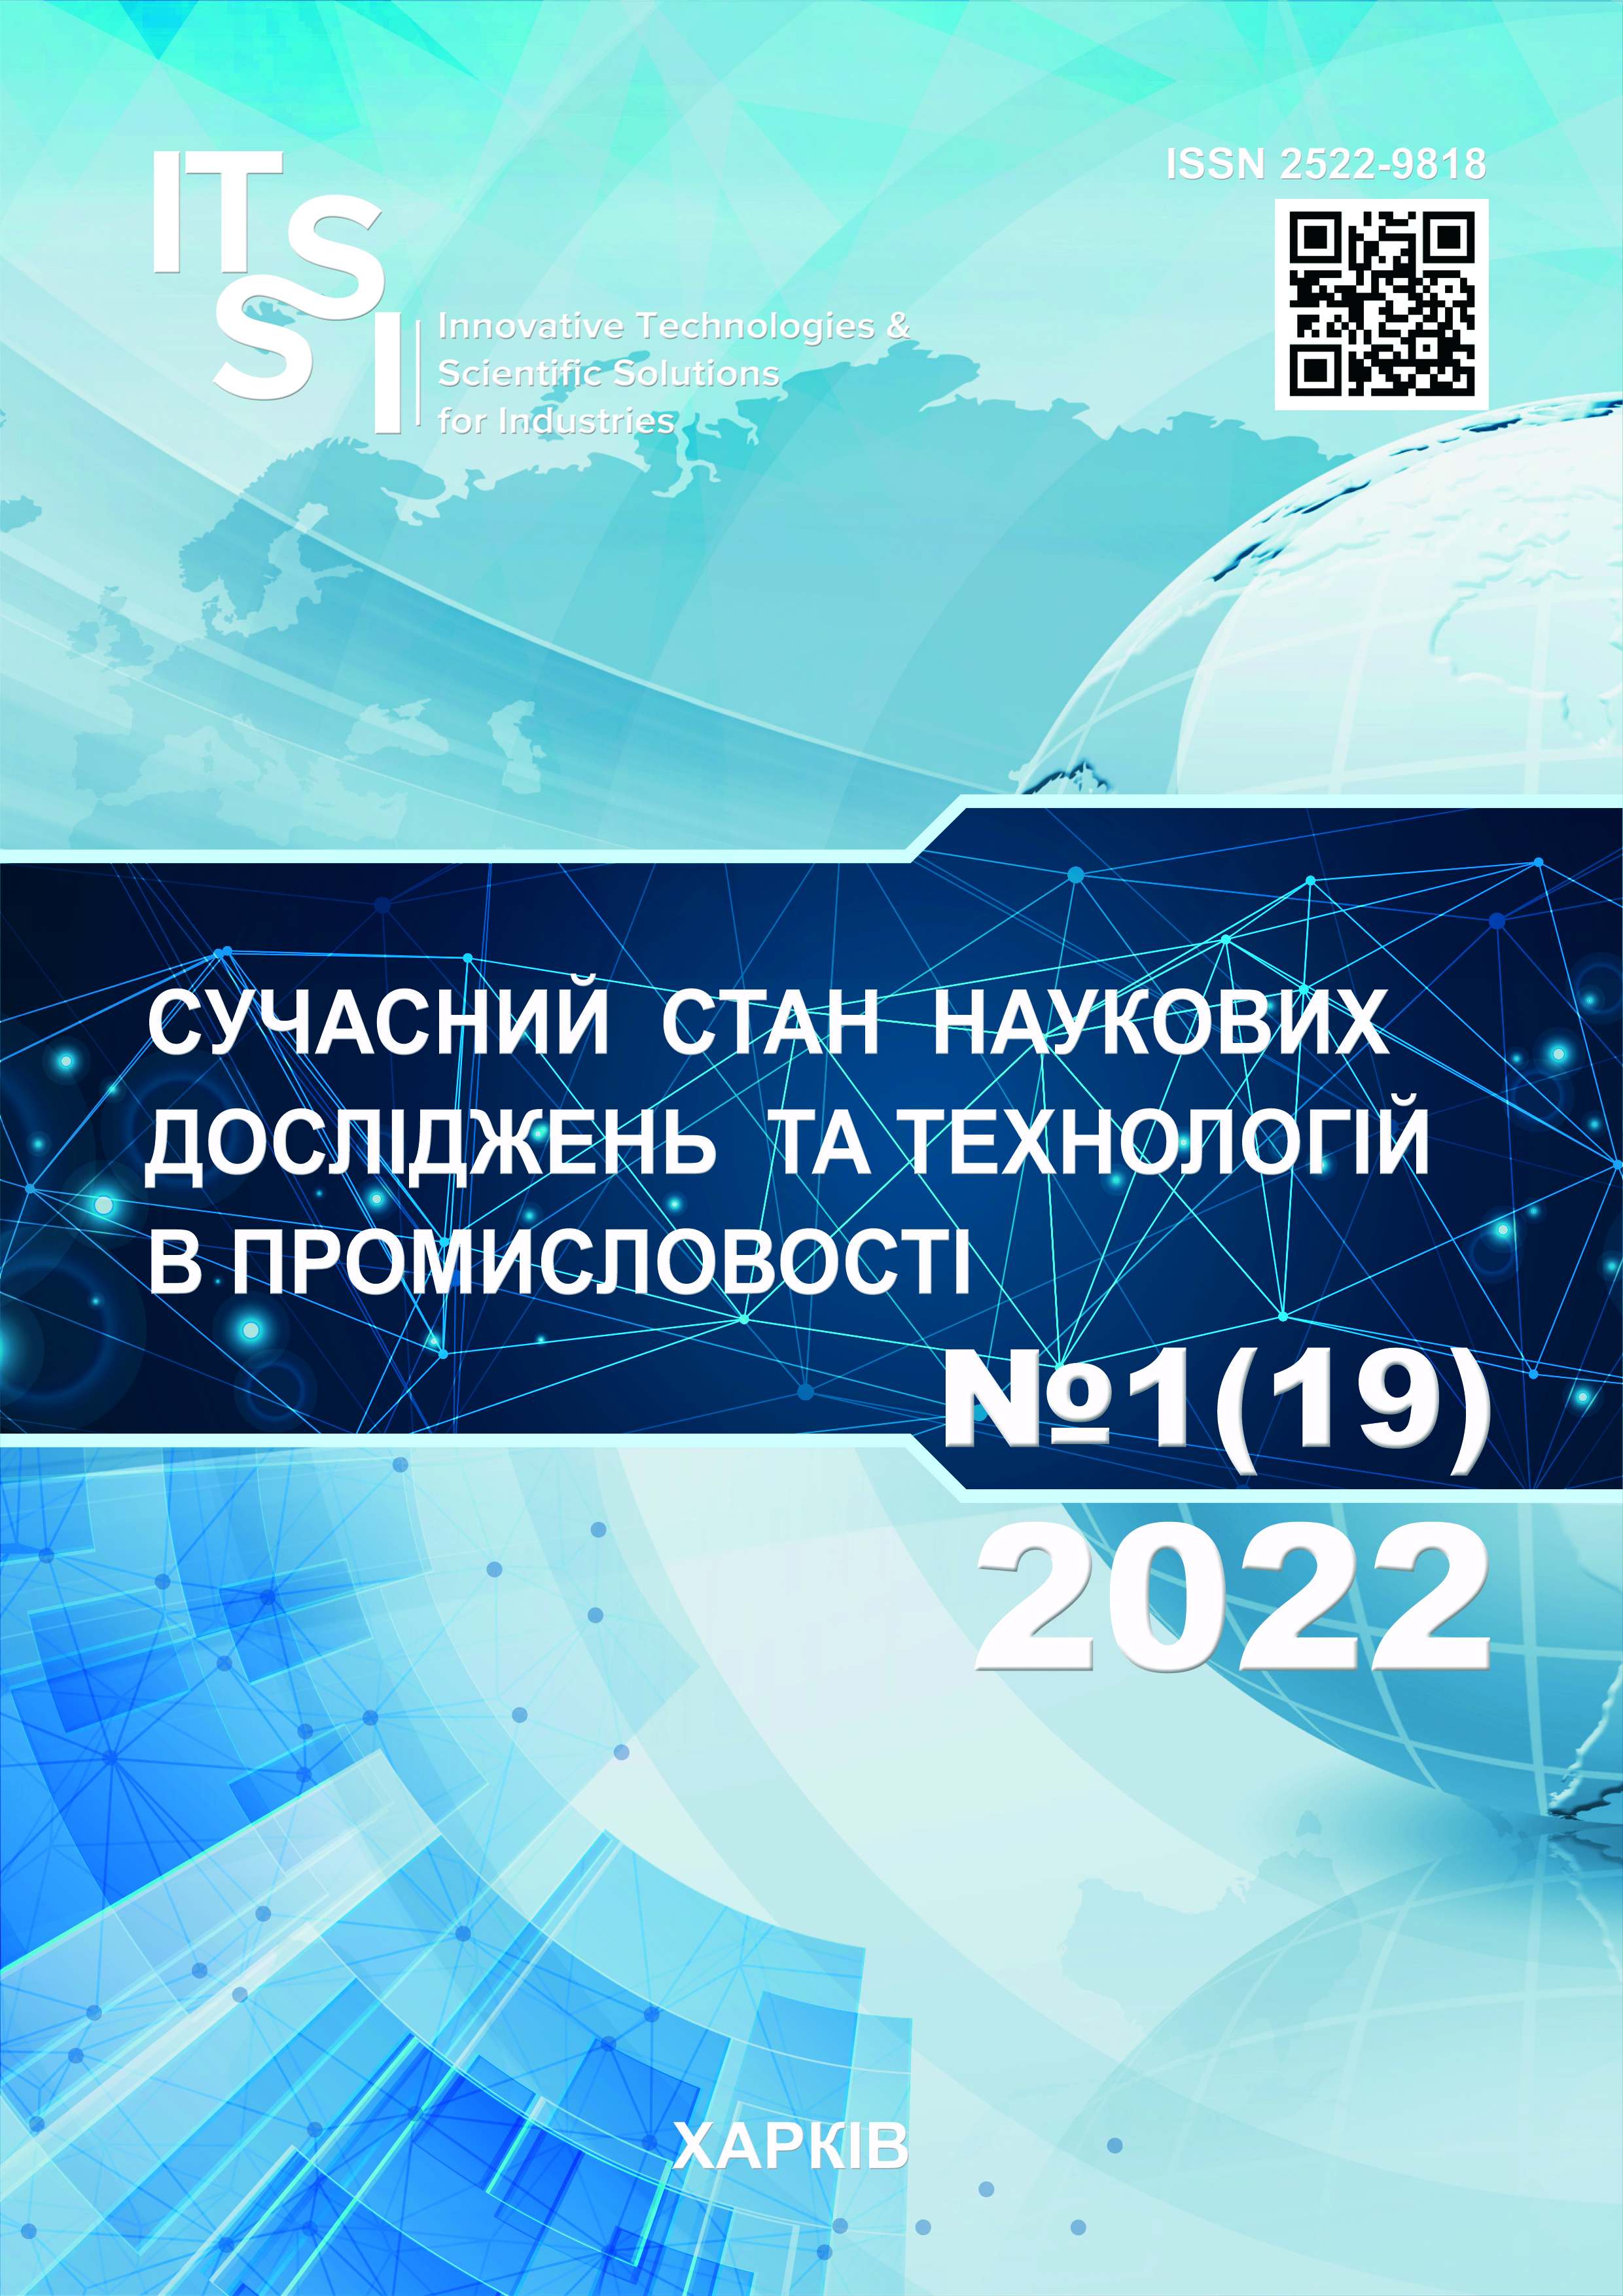 					View No. 1 (19) (2022): INNOVATIVE  TECHNOLOGIES  AND  SCIENTIFIC SOLUTIONS FOR INDUSTRIES
				